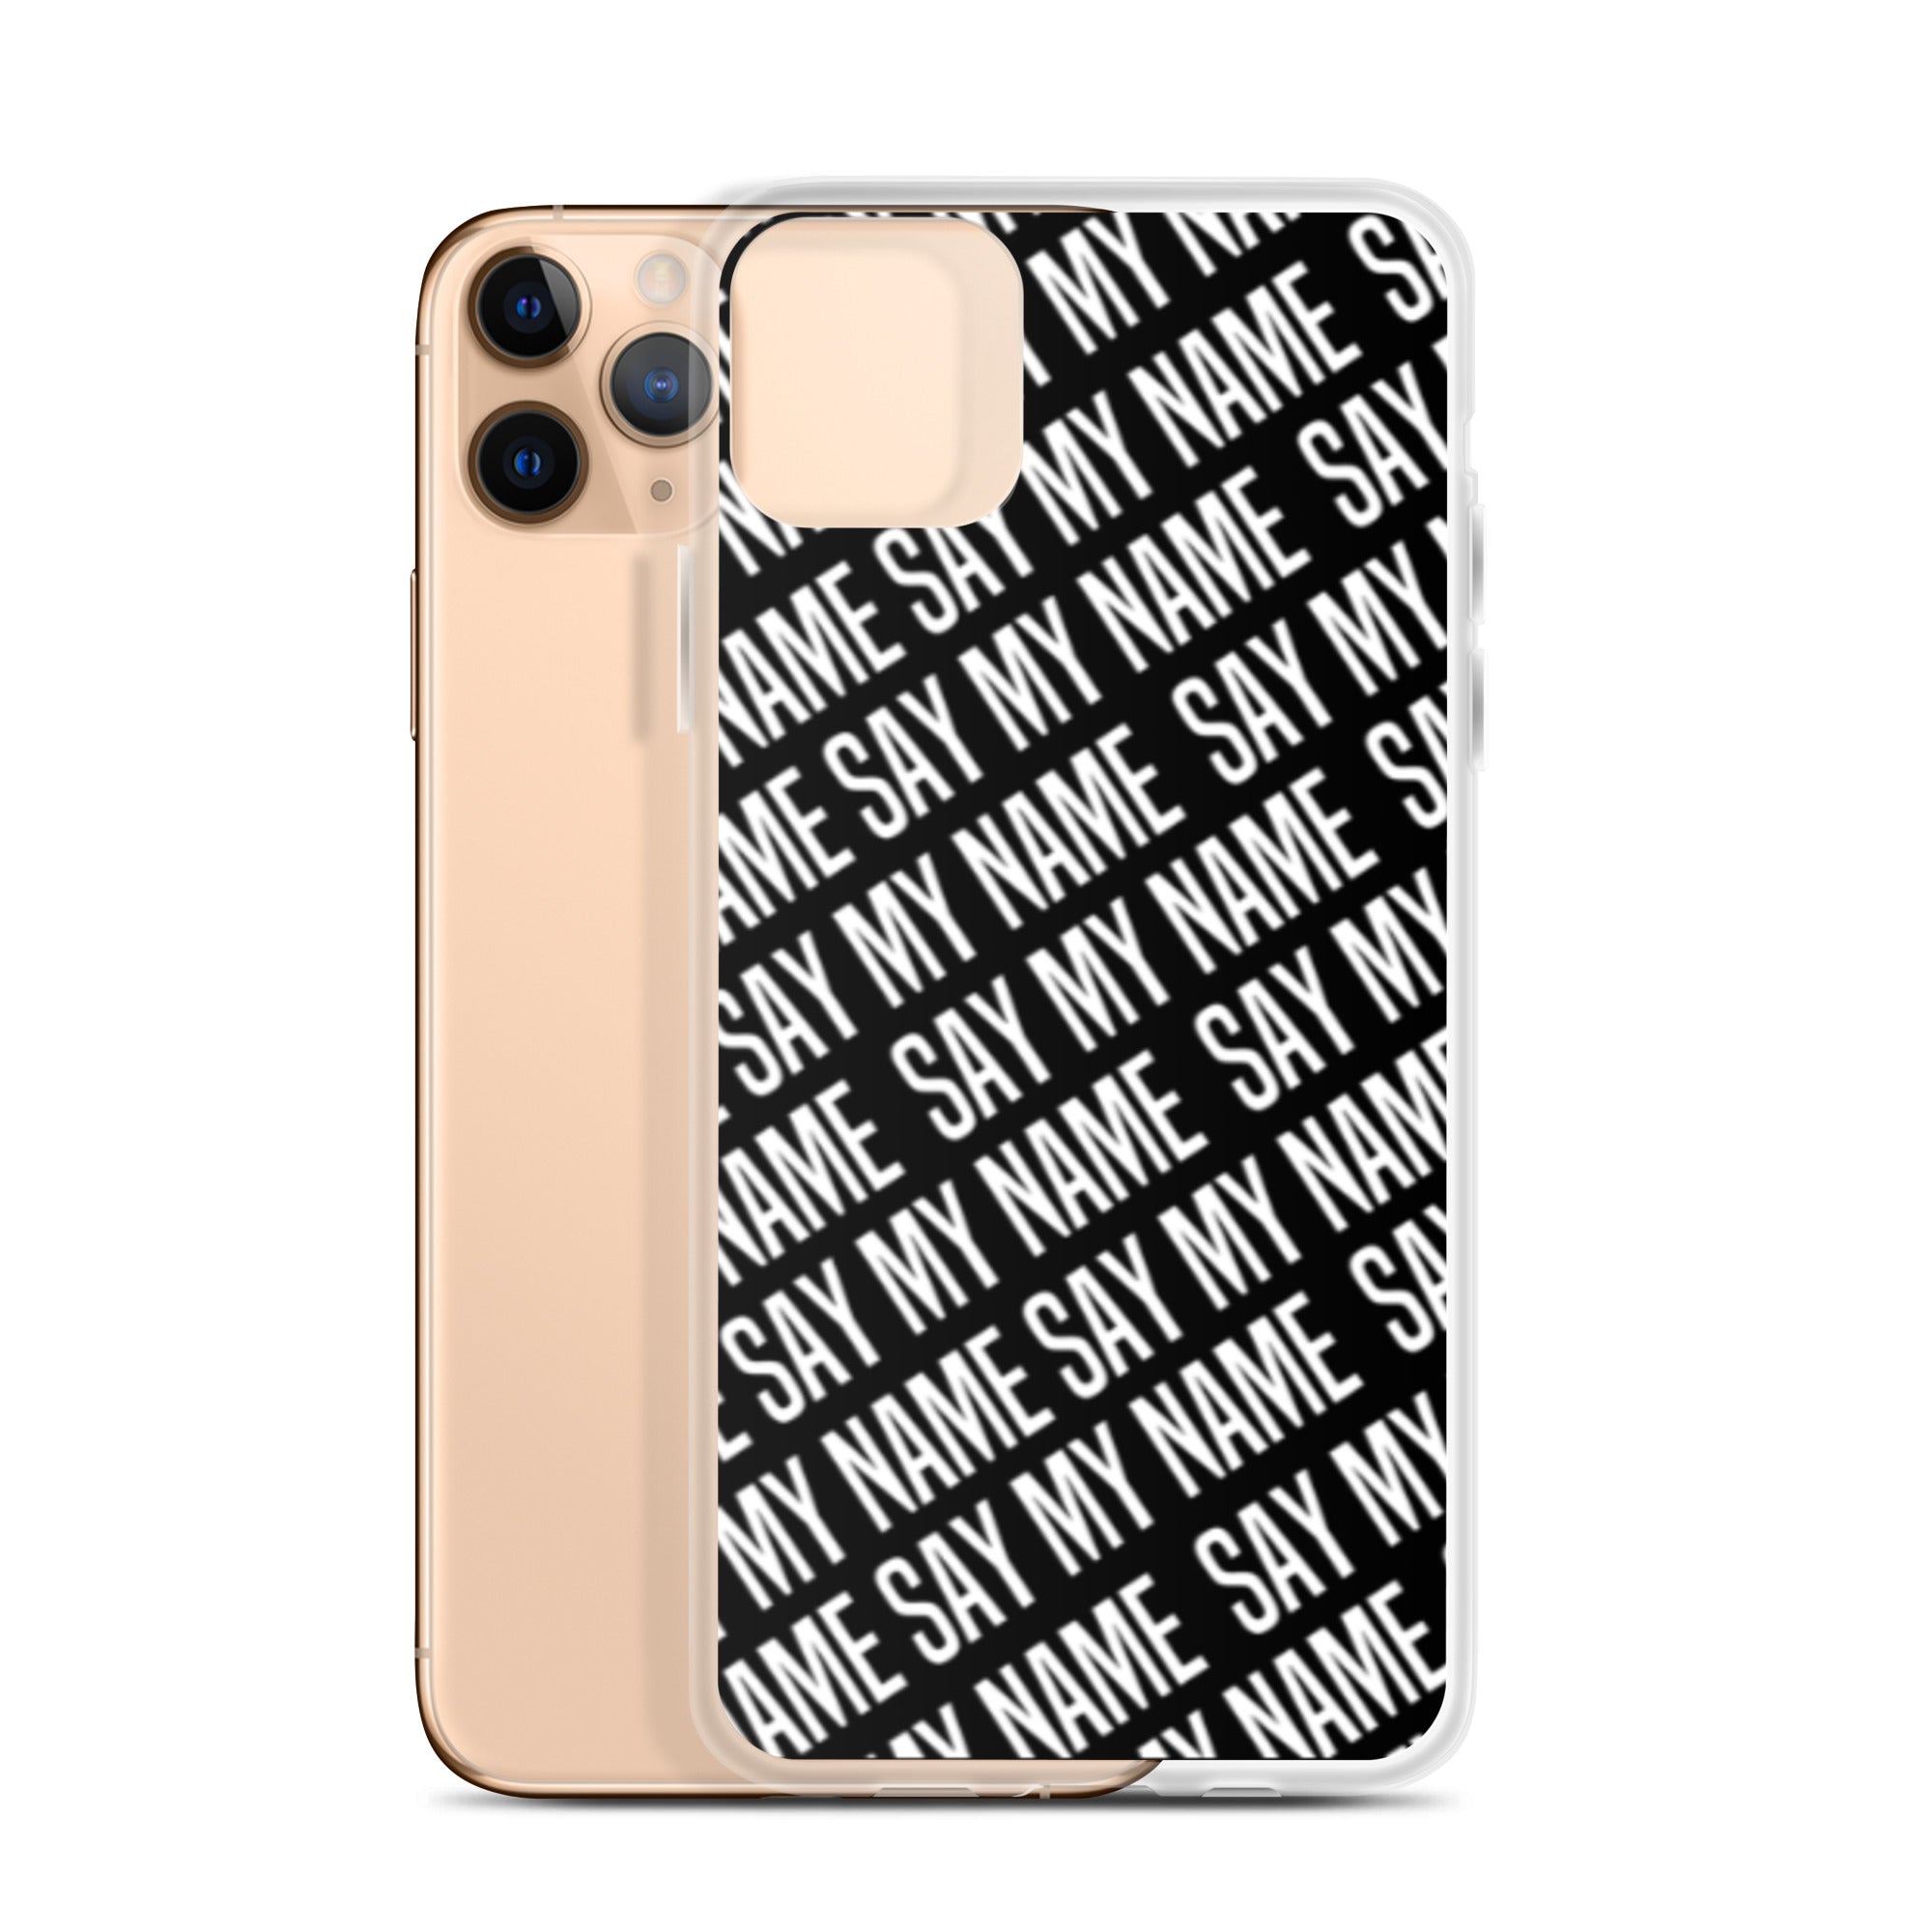 SAY MY NAME iPhone case